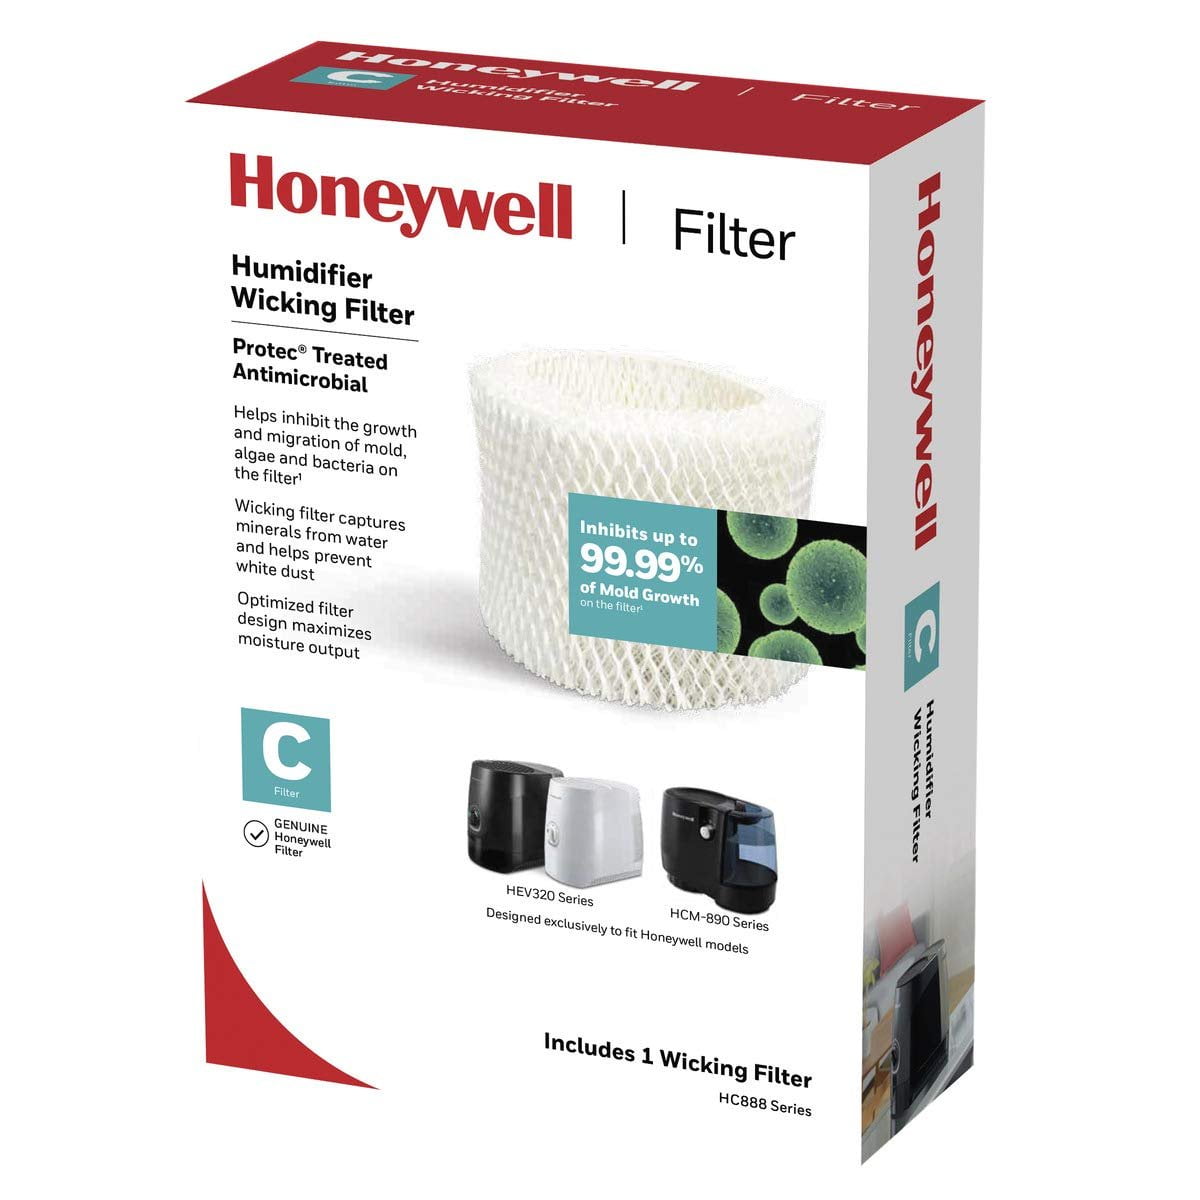 2X Humidifier Filter for Honeywell HCM-6009 